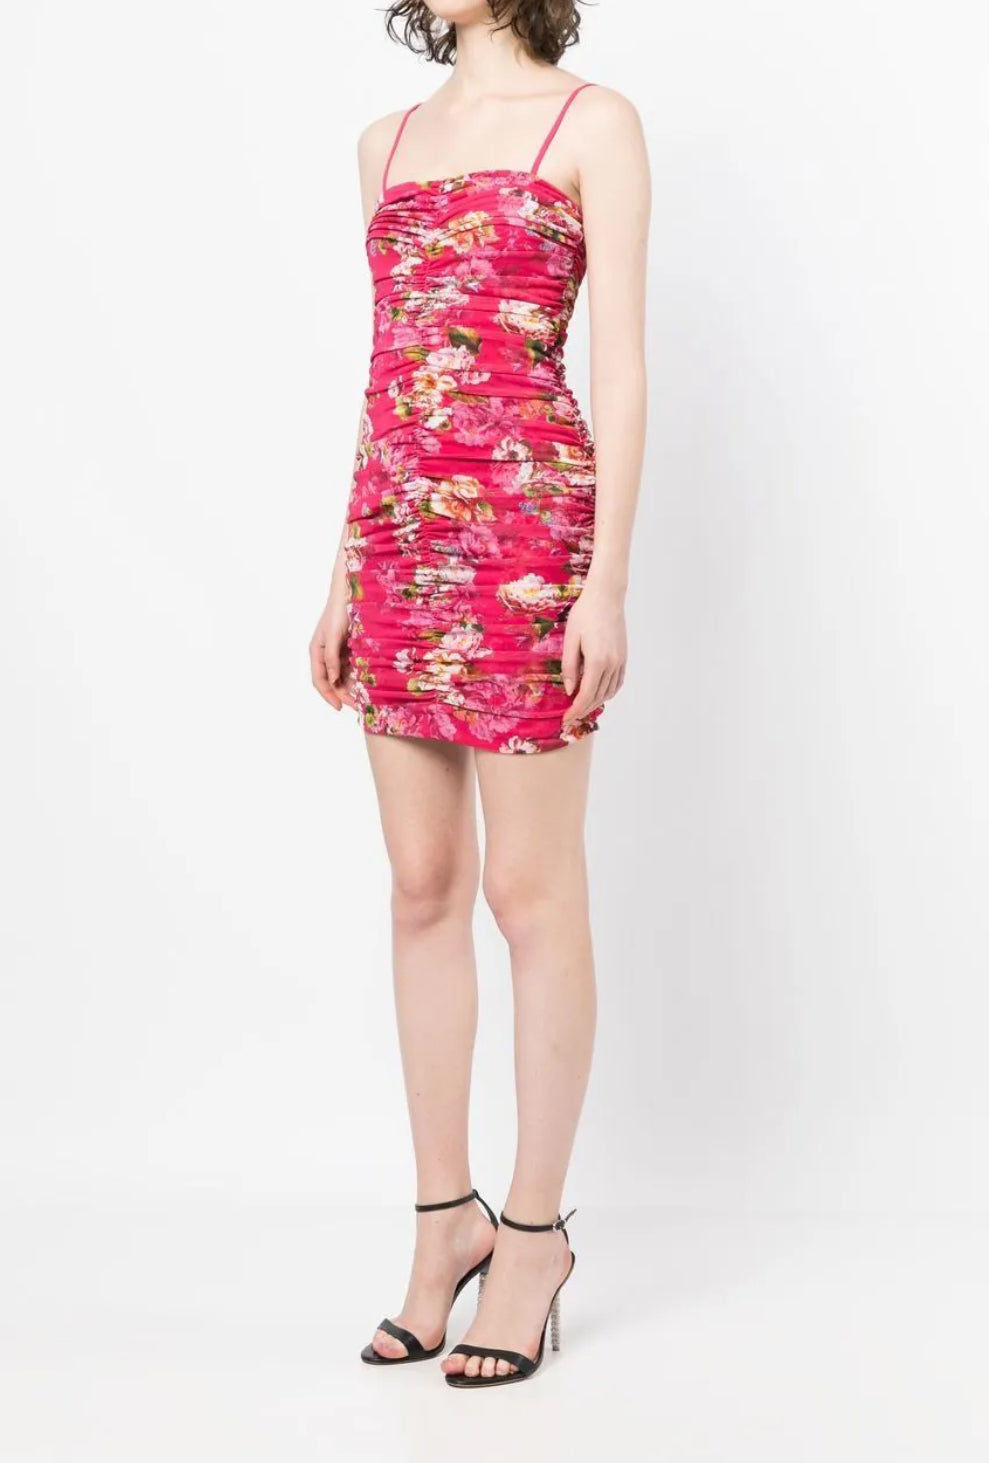 L’Agence Karly Ruched Dress - Cabaret Pink Multi Moschata Rosa